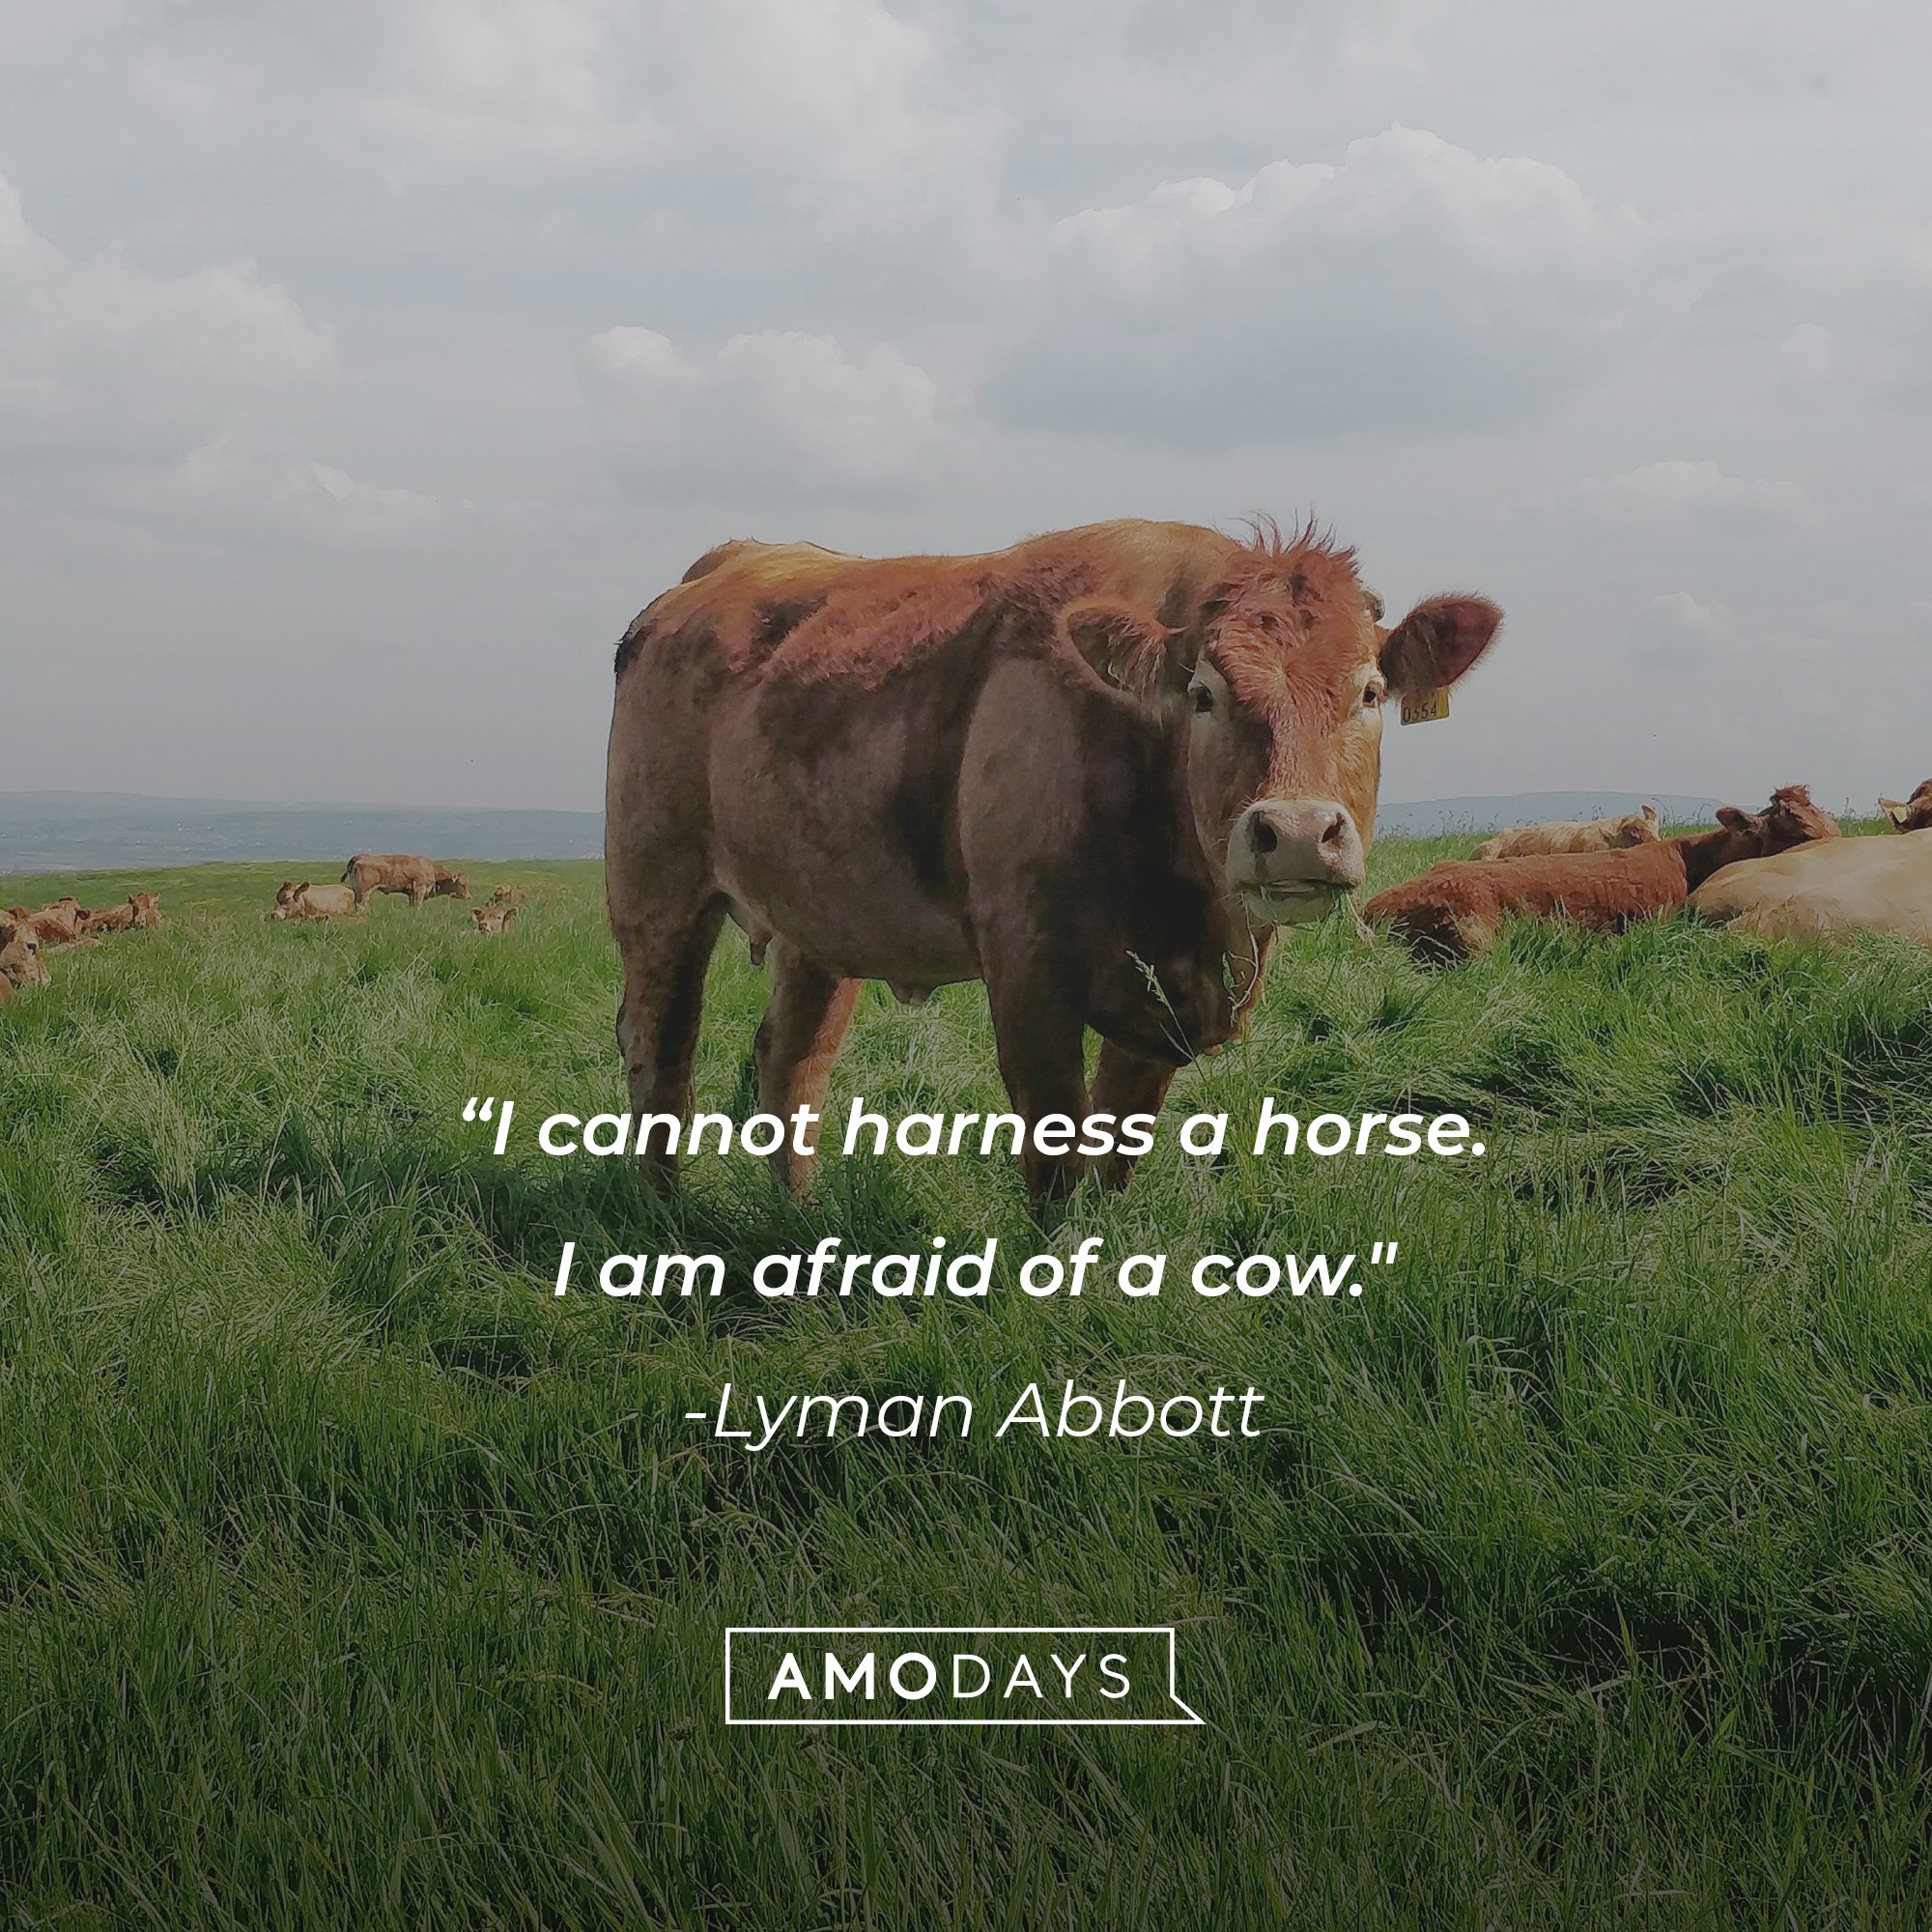 Lyman Abbott’s quote: “I cannot harness a horse. I am afraid of a cow." | Image: AmoDays